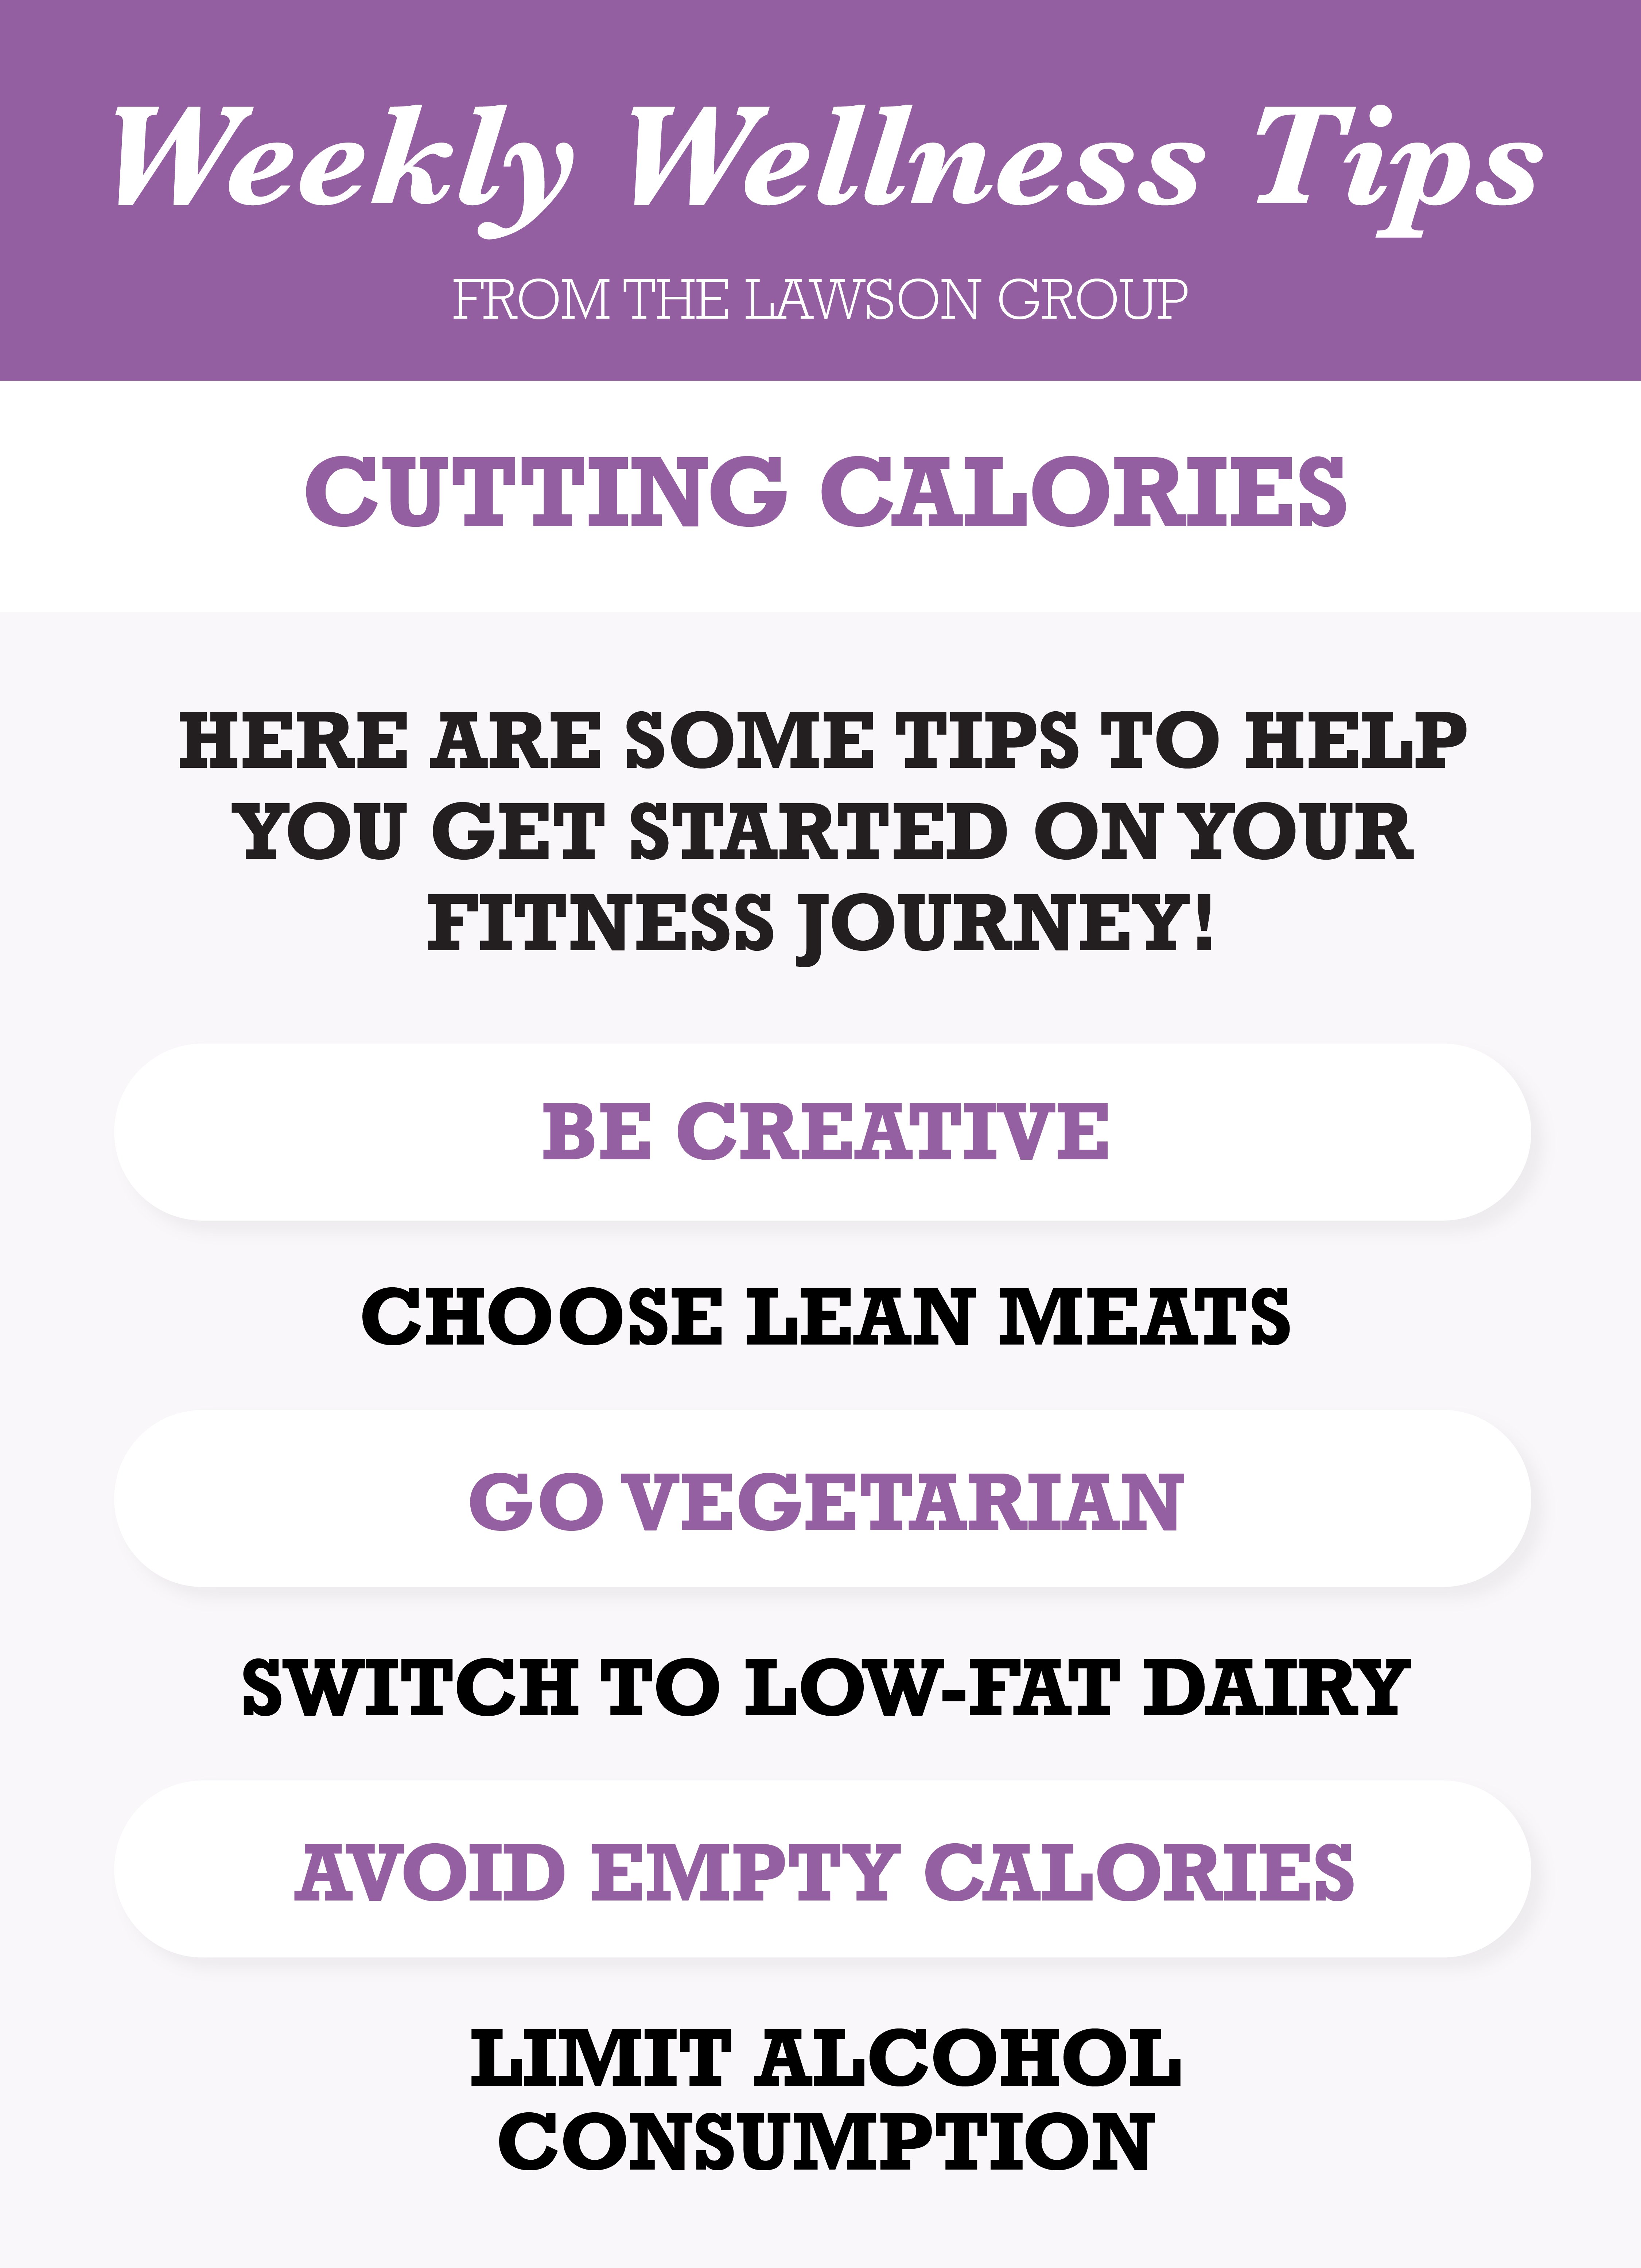 TLG22005 Wellness Tips CUTTING CALORIES Infographic